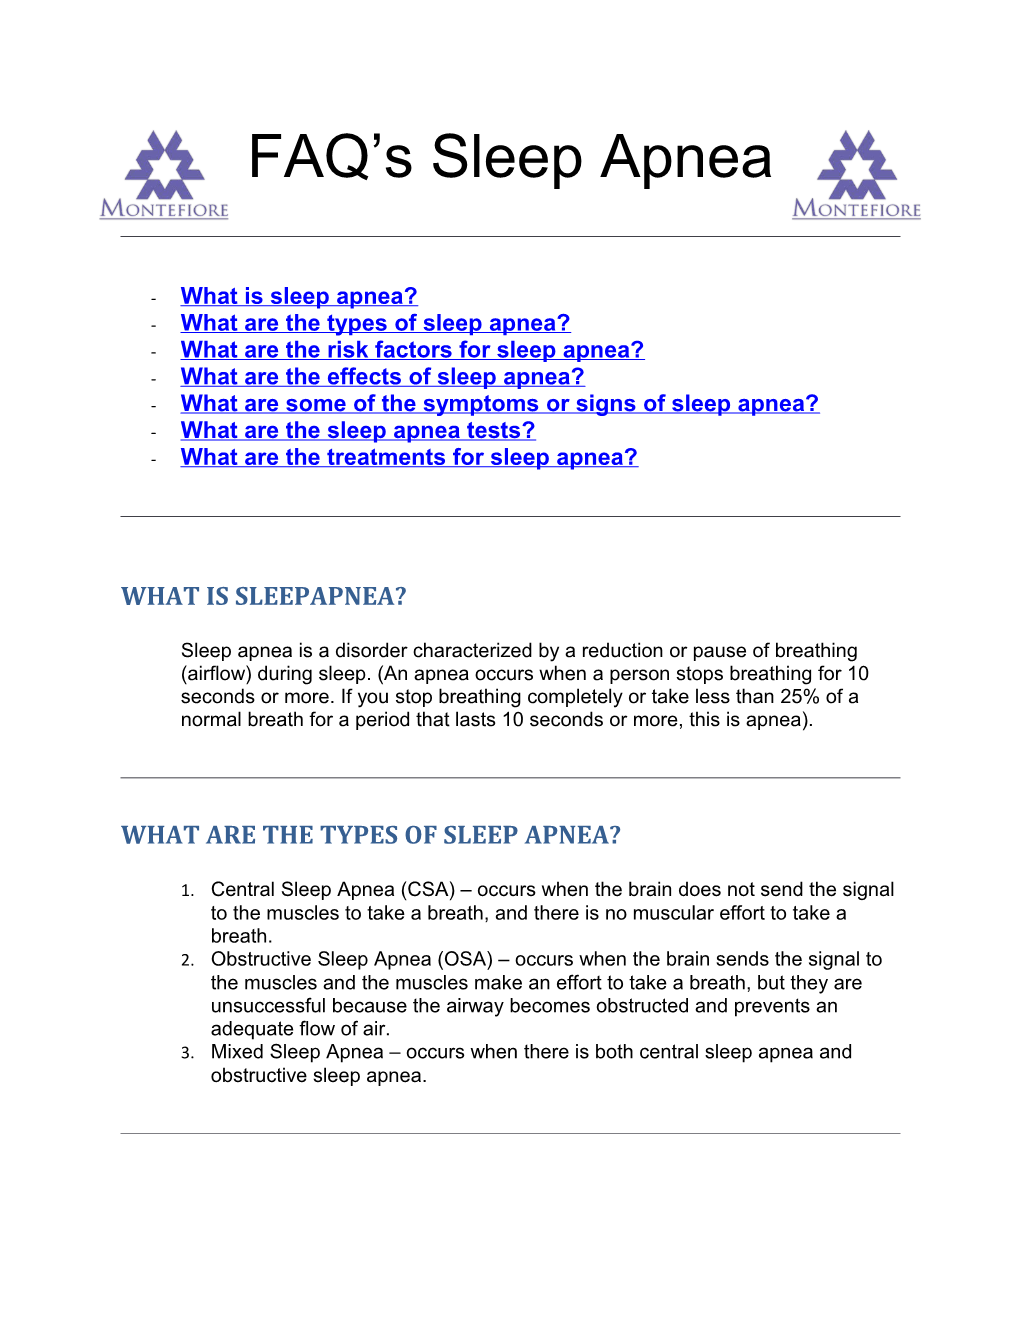 What Are the Risk Factors for Sleep Apnea?